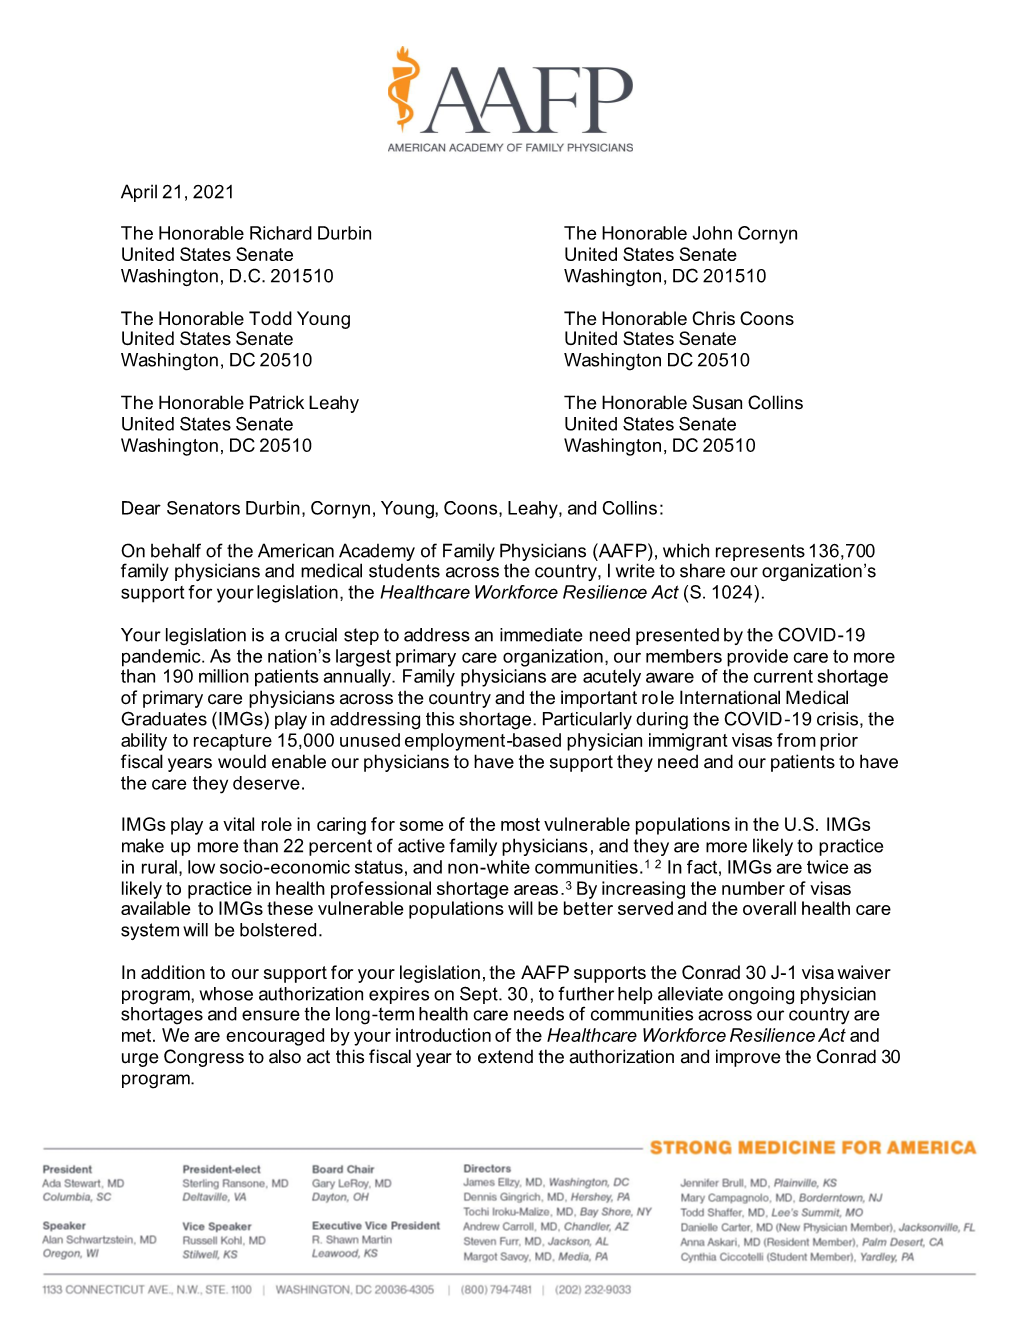 AAFP Letter to the Senate in Support of the Healthcare Workforce